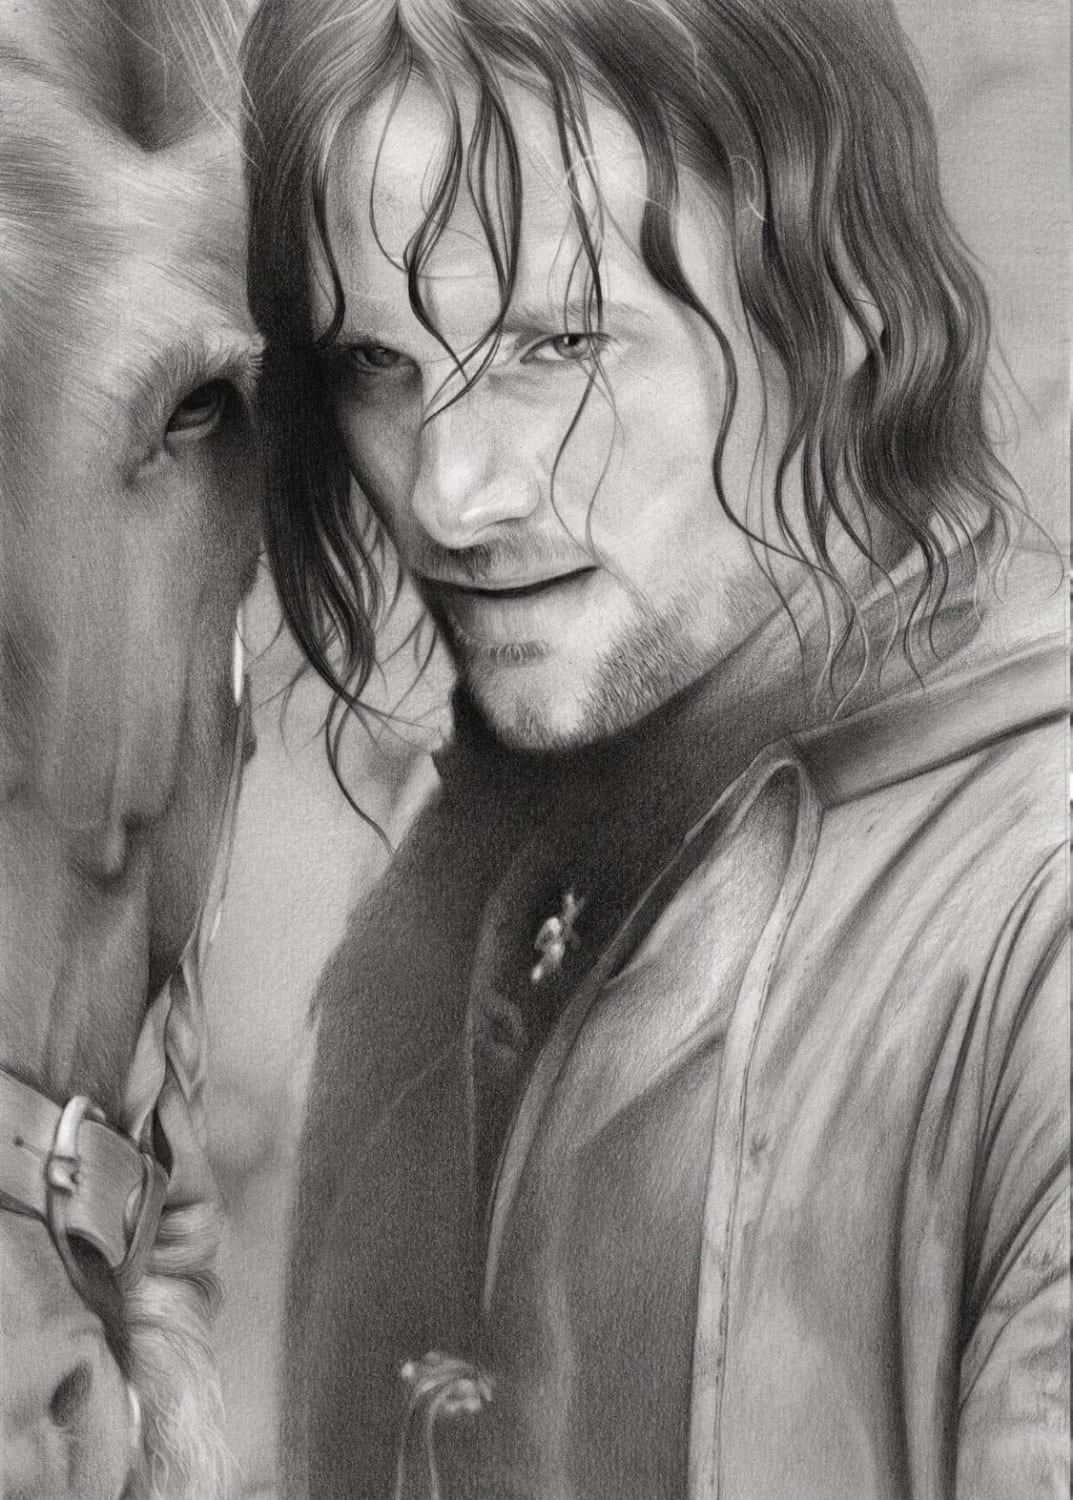 My gf is a massive fan of both horses and LOTR so I did this drawing for her 😊 what do you think?